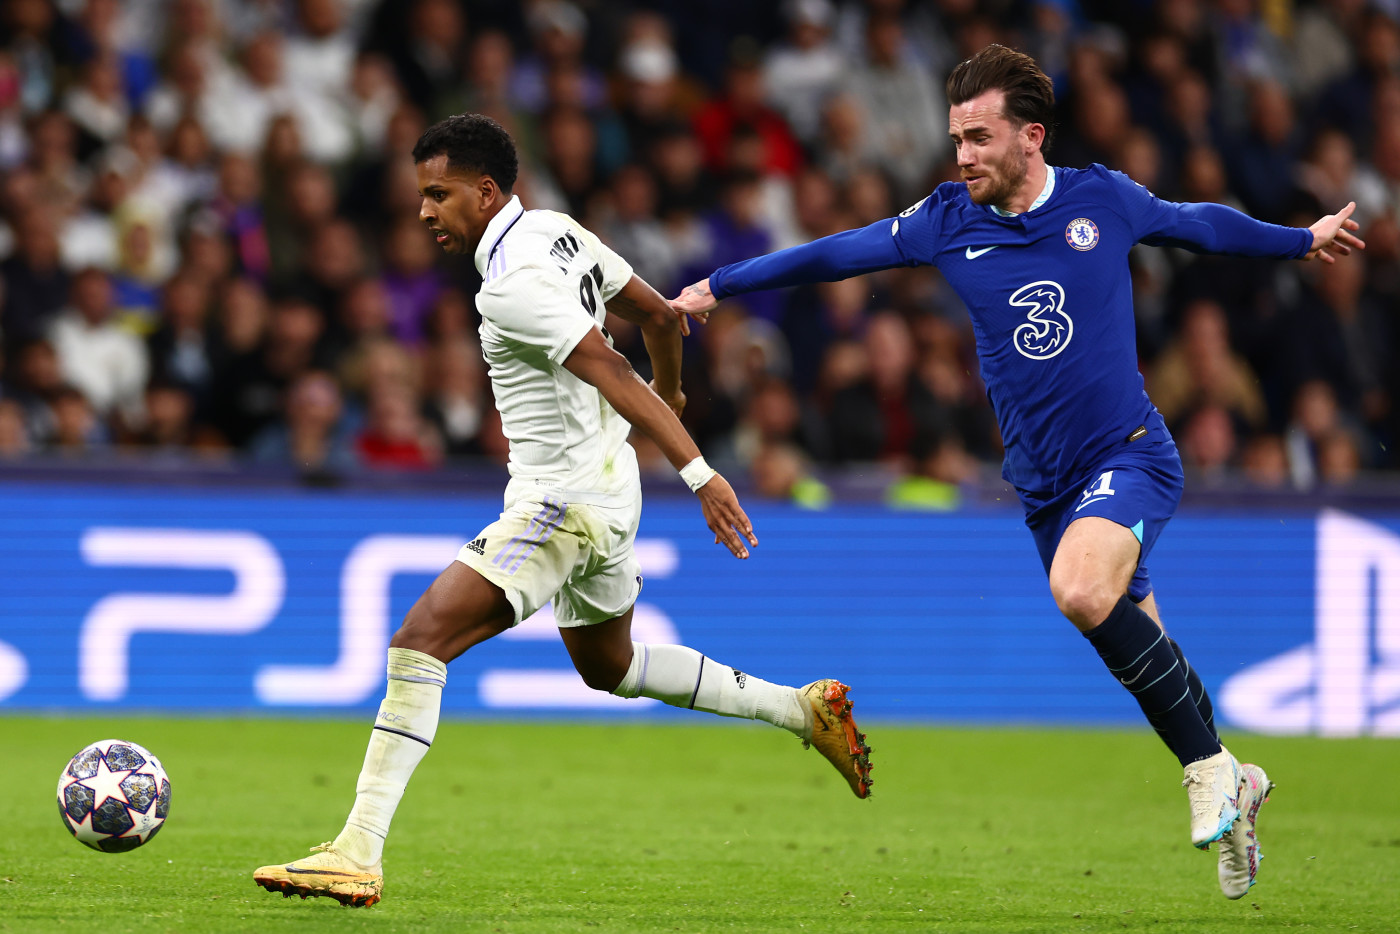 Frank Lampard admits Chelsea are 'lacking belief' after Real Madrid defeat